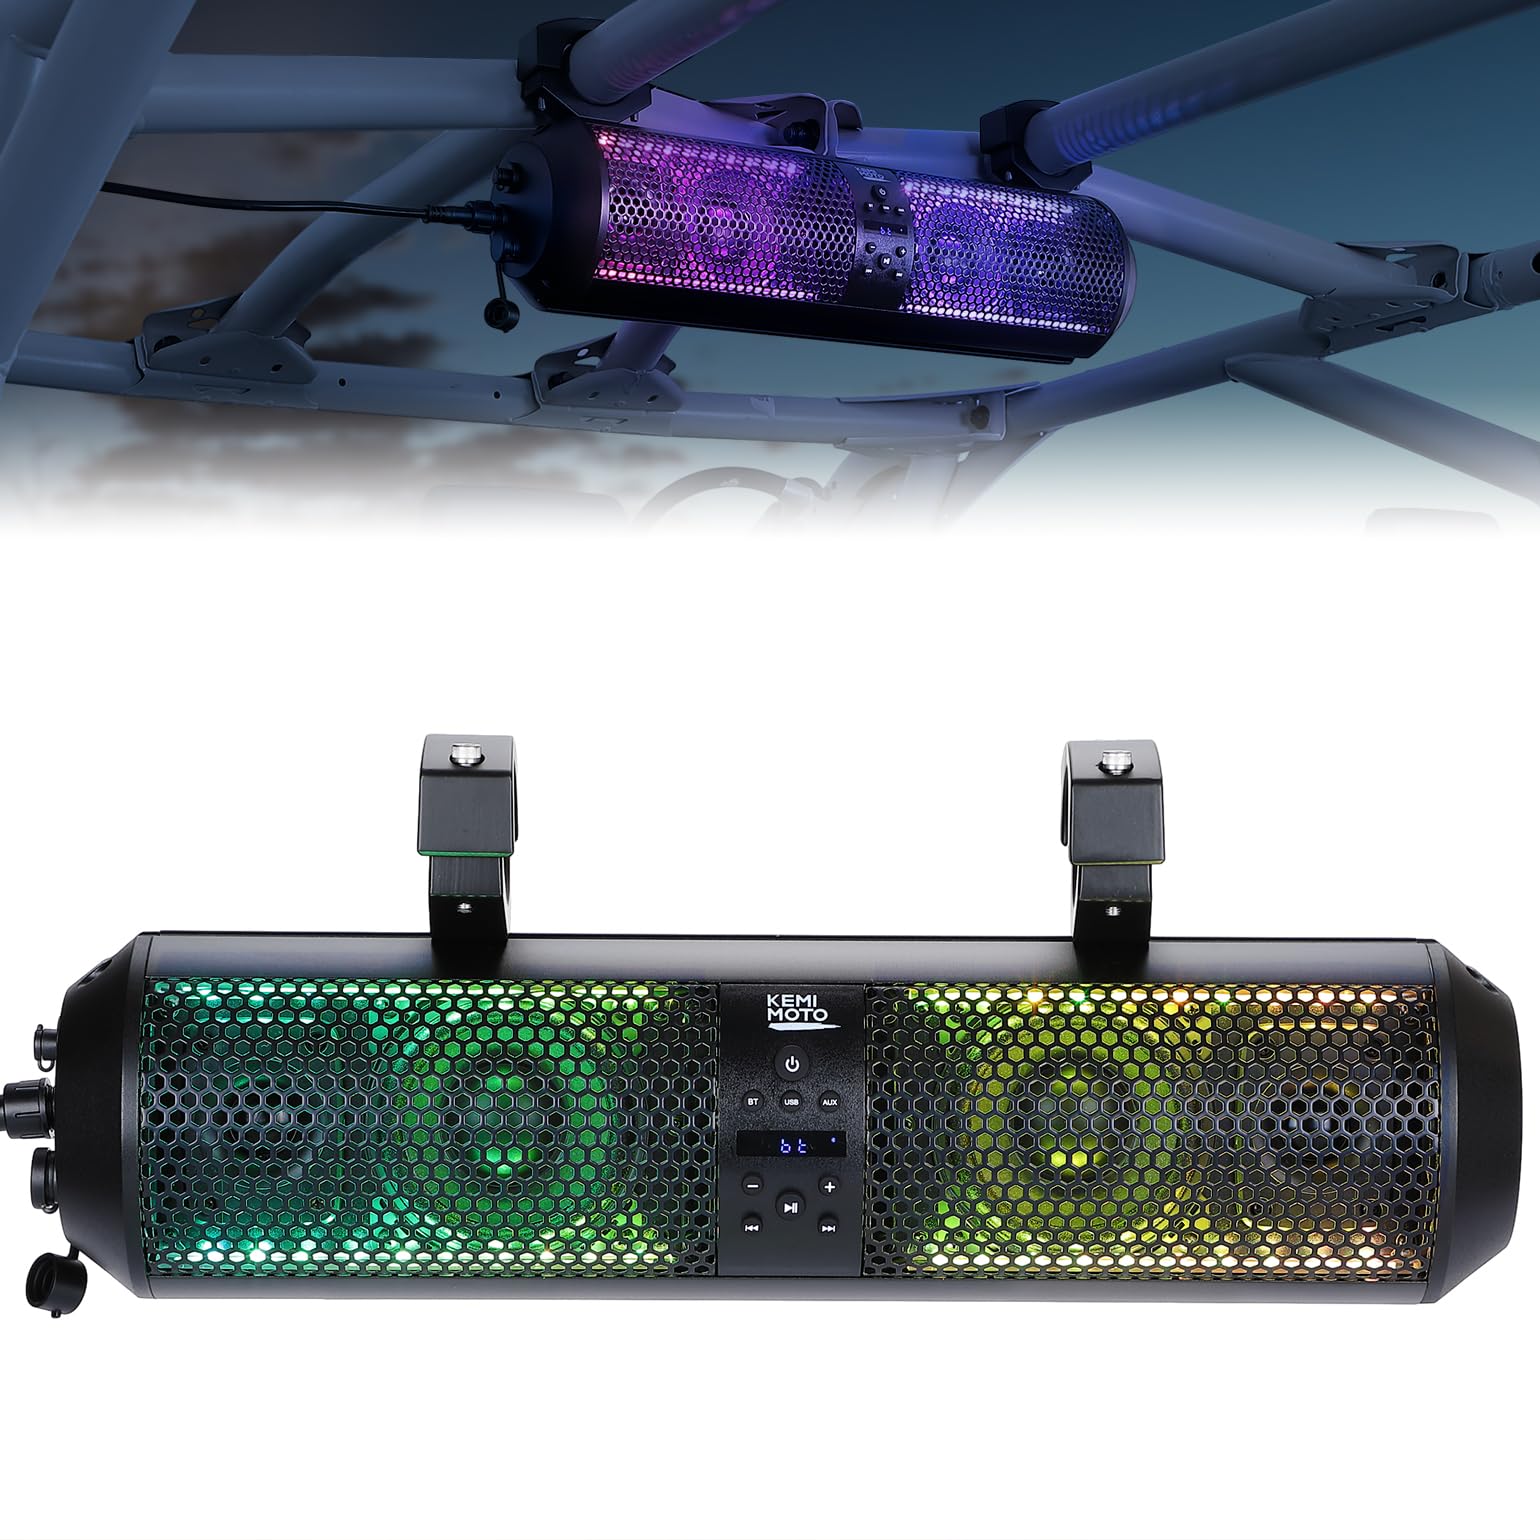 KEMIMOTO UTV Sound Bar 18 Inch SXS Speaker RGB Wireless Control Bluetooth Compatible with 2X Tweeter and 2X Subwoofer Compatible with Polaris Can am Honda CForce, for 1.56